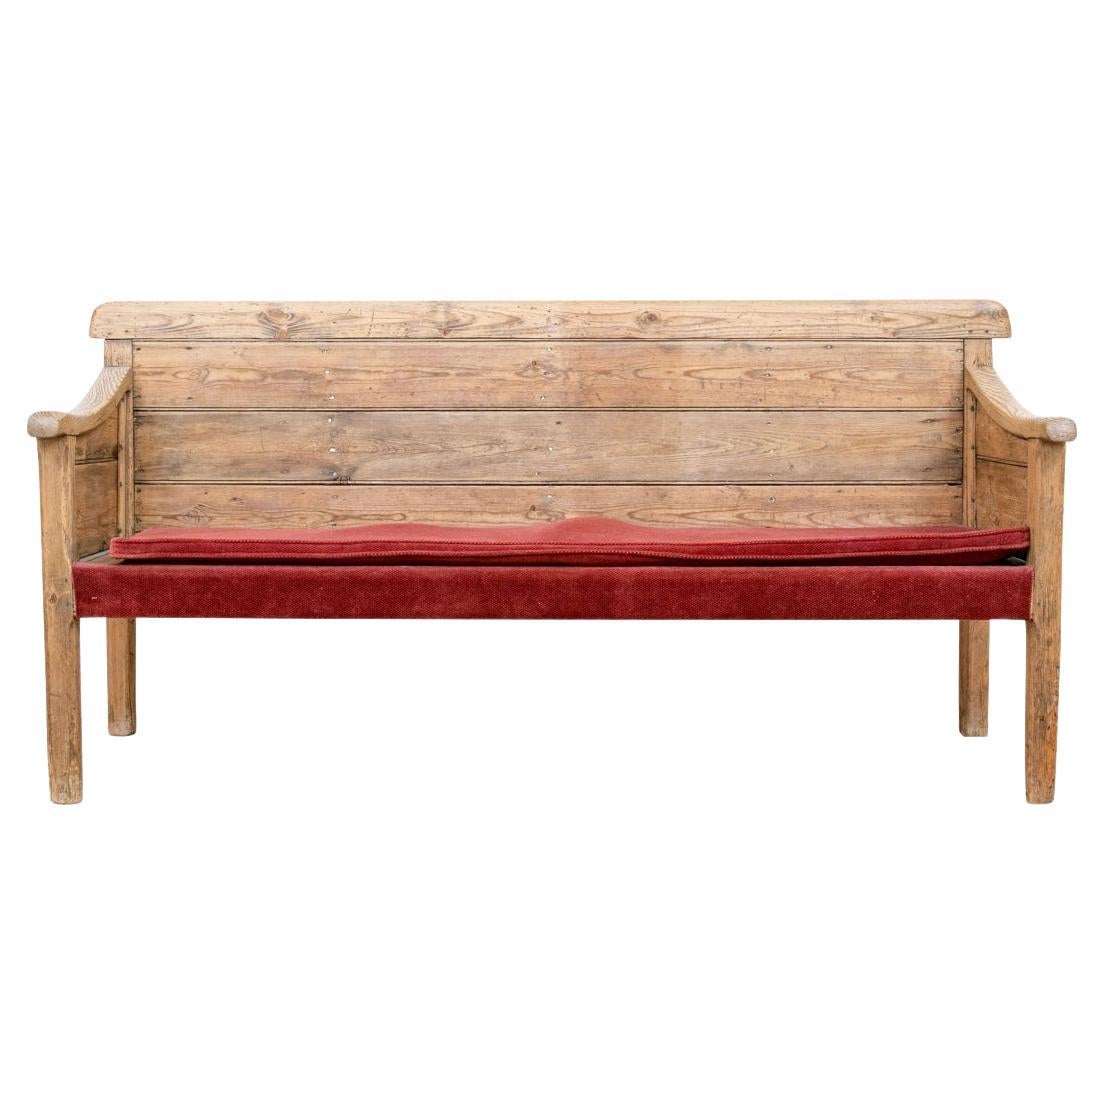 Pine Bench From Antique Wood in Rustic Style 